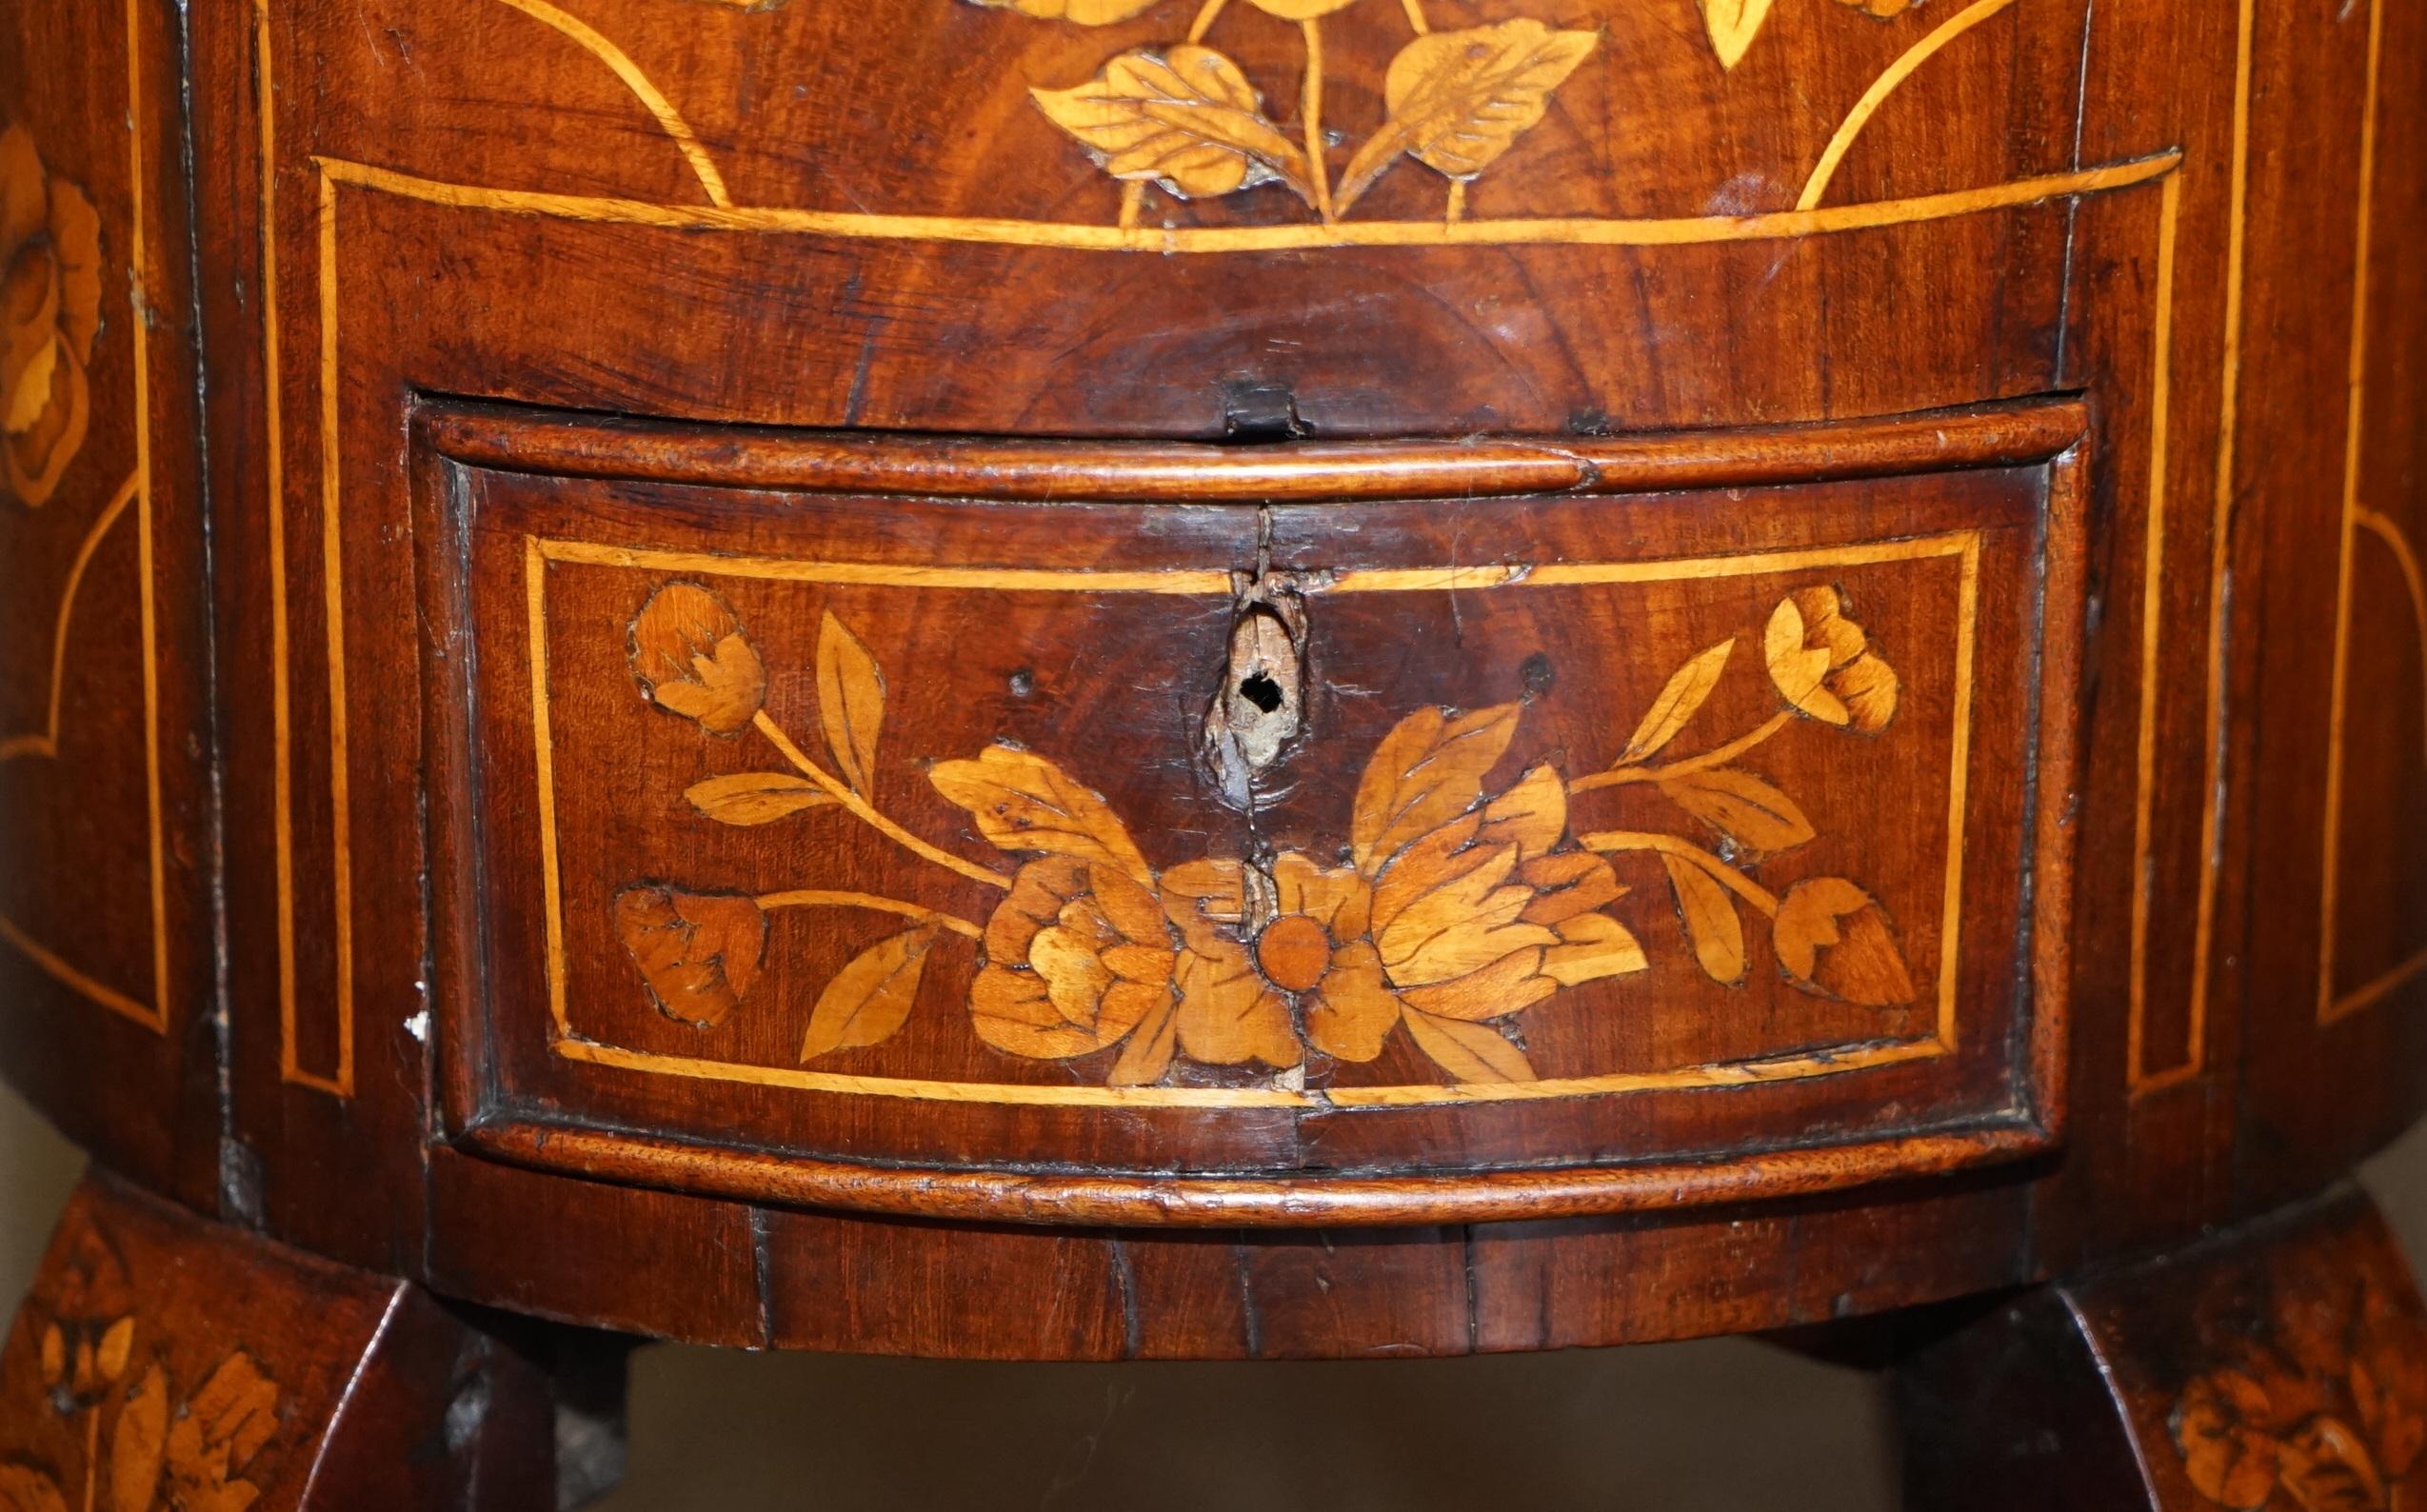 Hand-Crafted Exquisite Antique circa 1800 Dutch Inlaid Wine Cooler Bucket Claw & Ball Feet For Sale